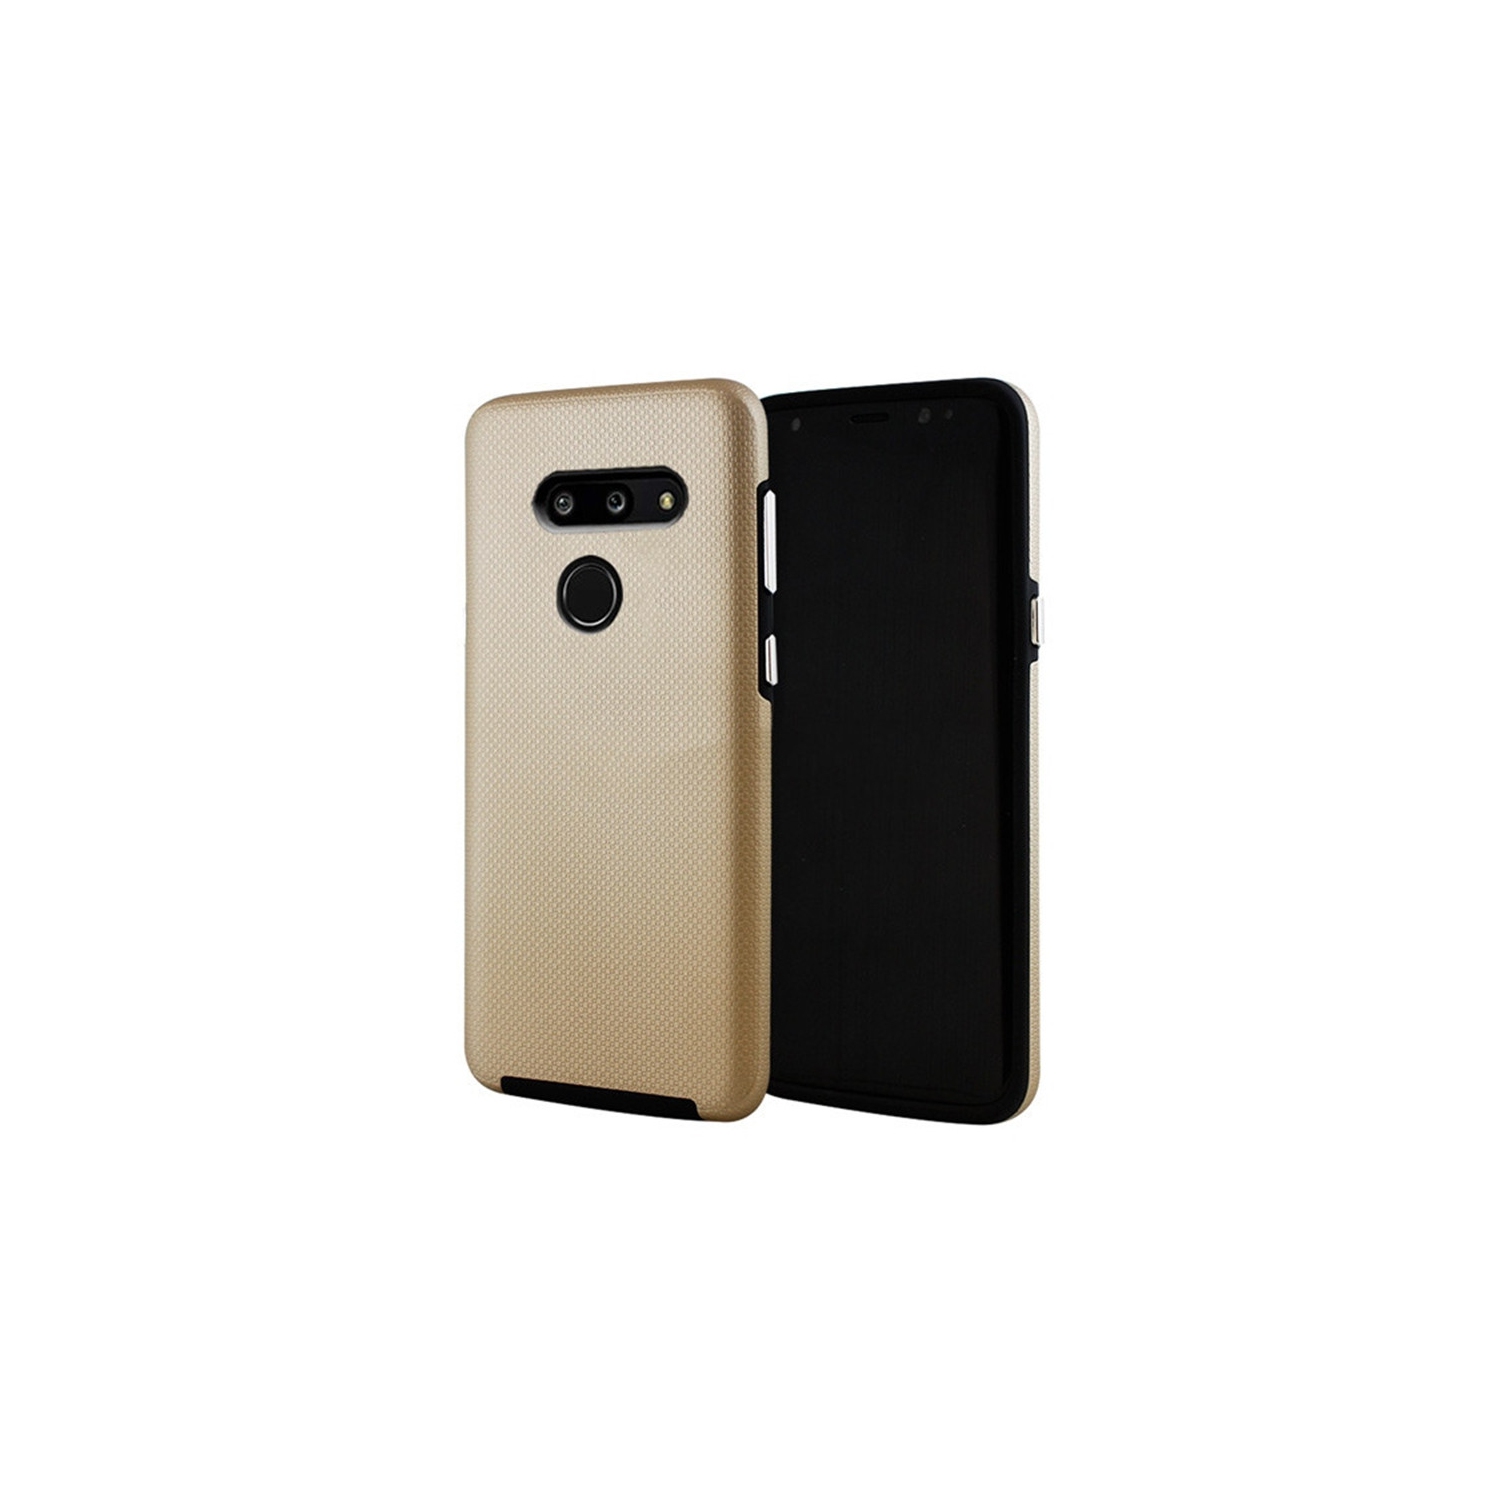 【CSmart】 Slim Fitted Hybrid Hard PC Shell Shockproof Scratch Resistant Case Cover for LG G8, Gold